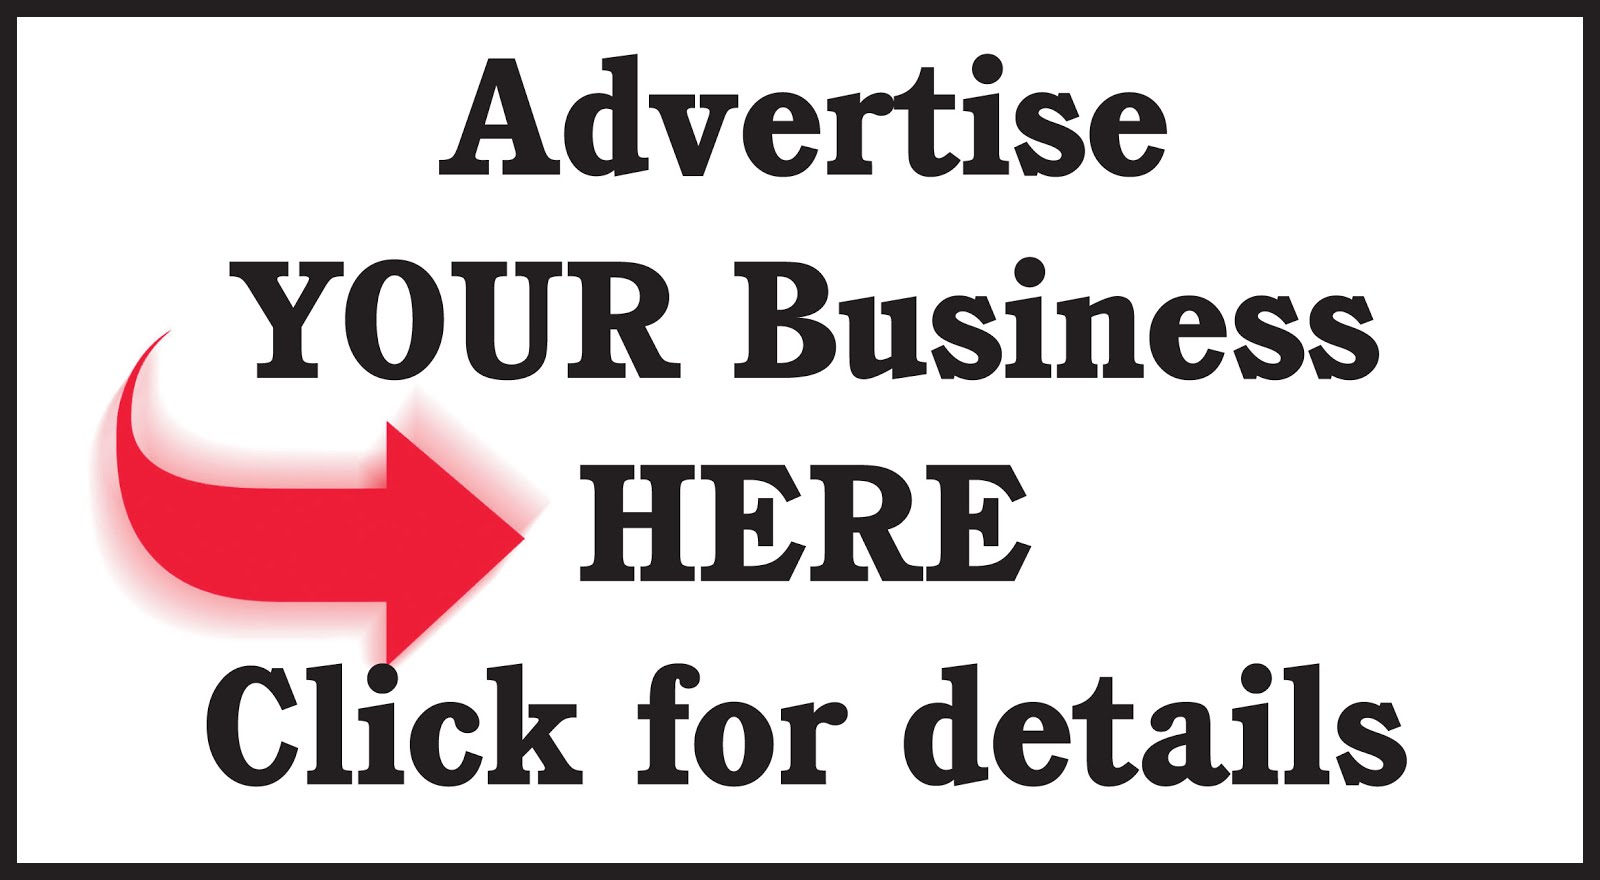 Place Your Advert Here